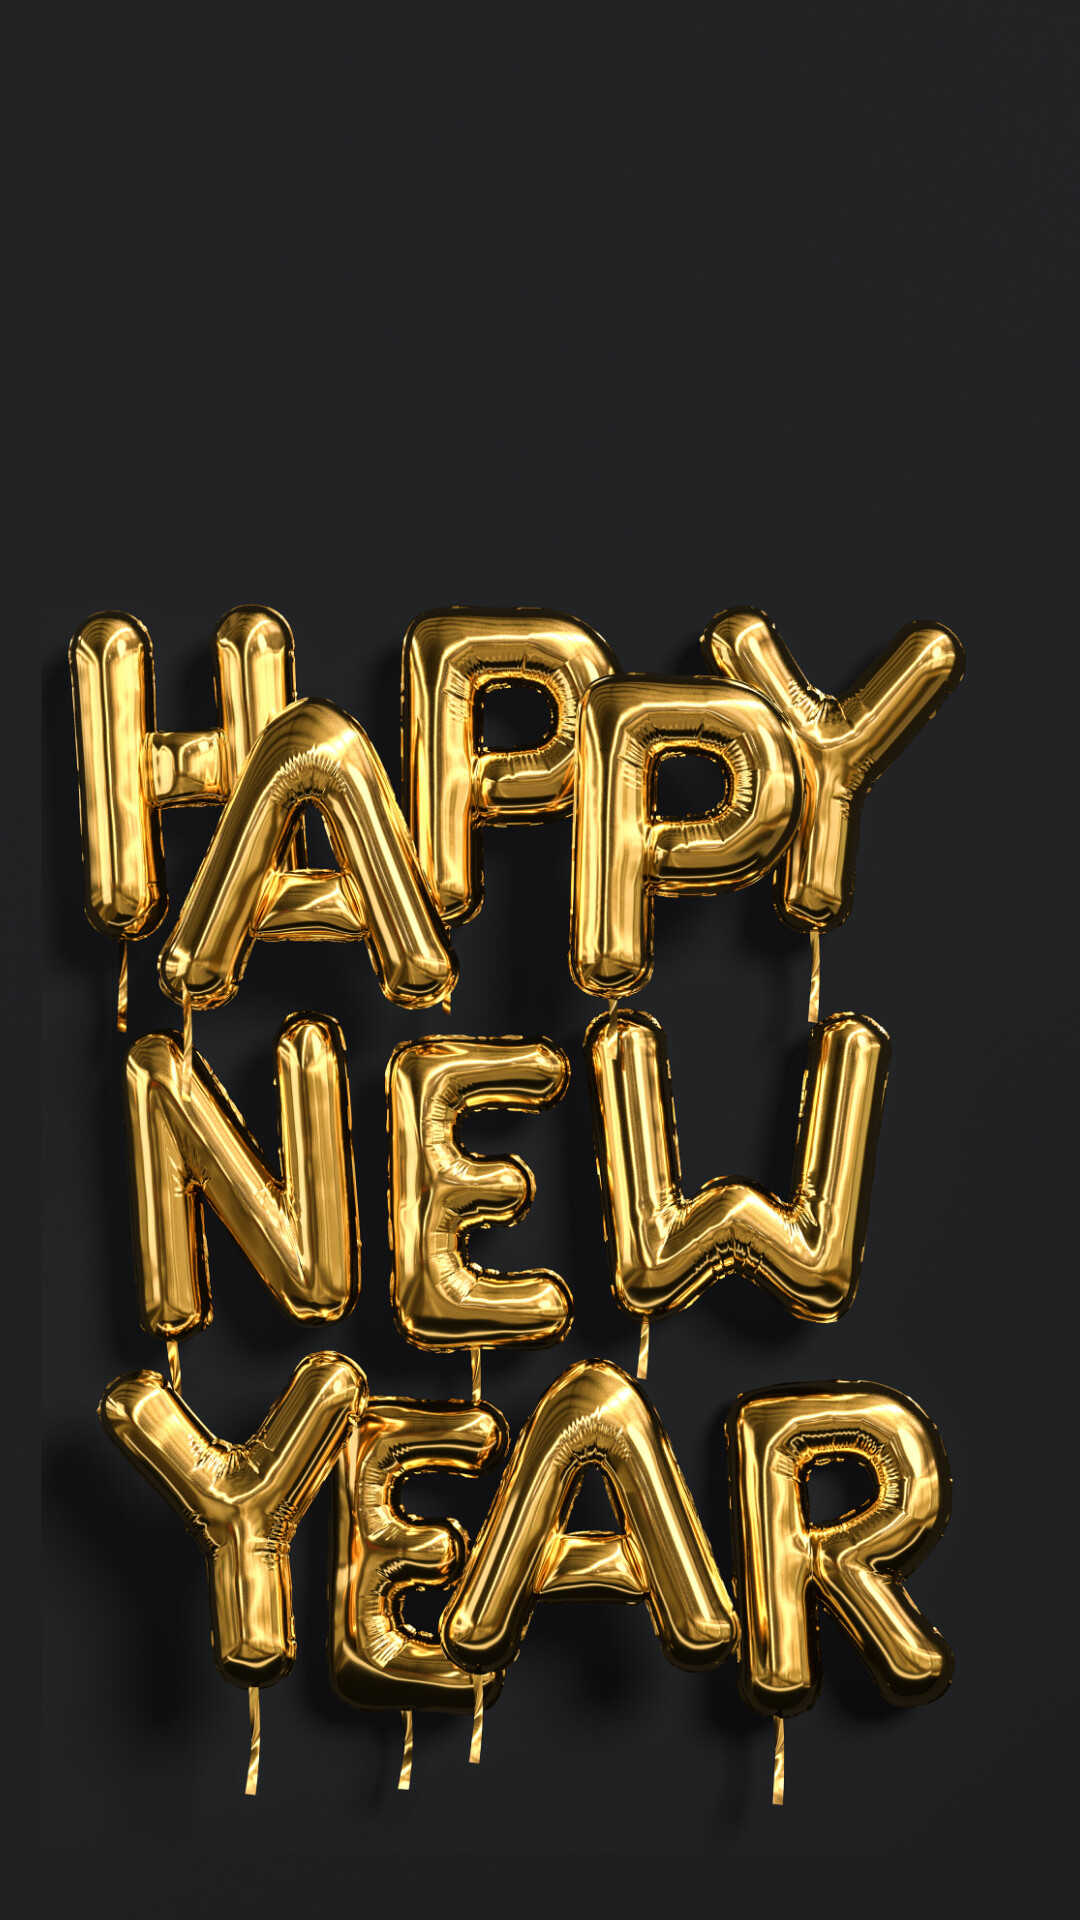 New Year: The night of 31 December and the morning of 1 January, Greeting. 1080x1920 Full HD Wallpaper.